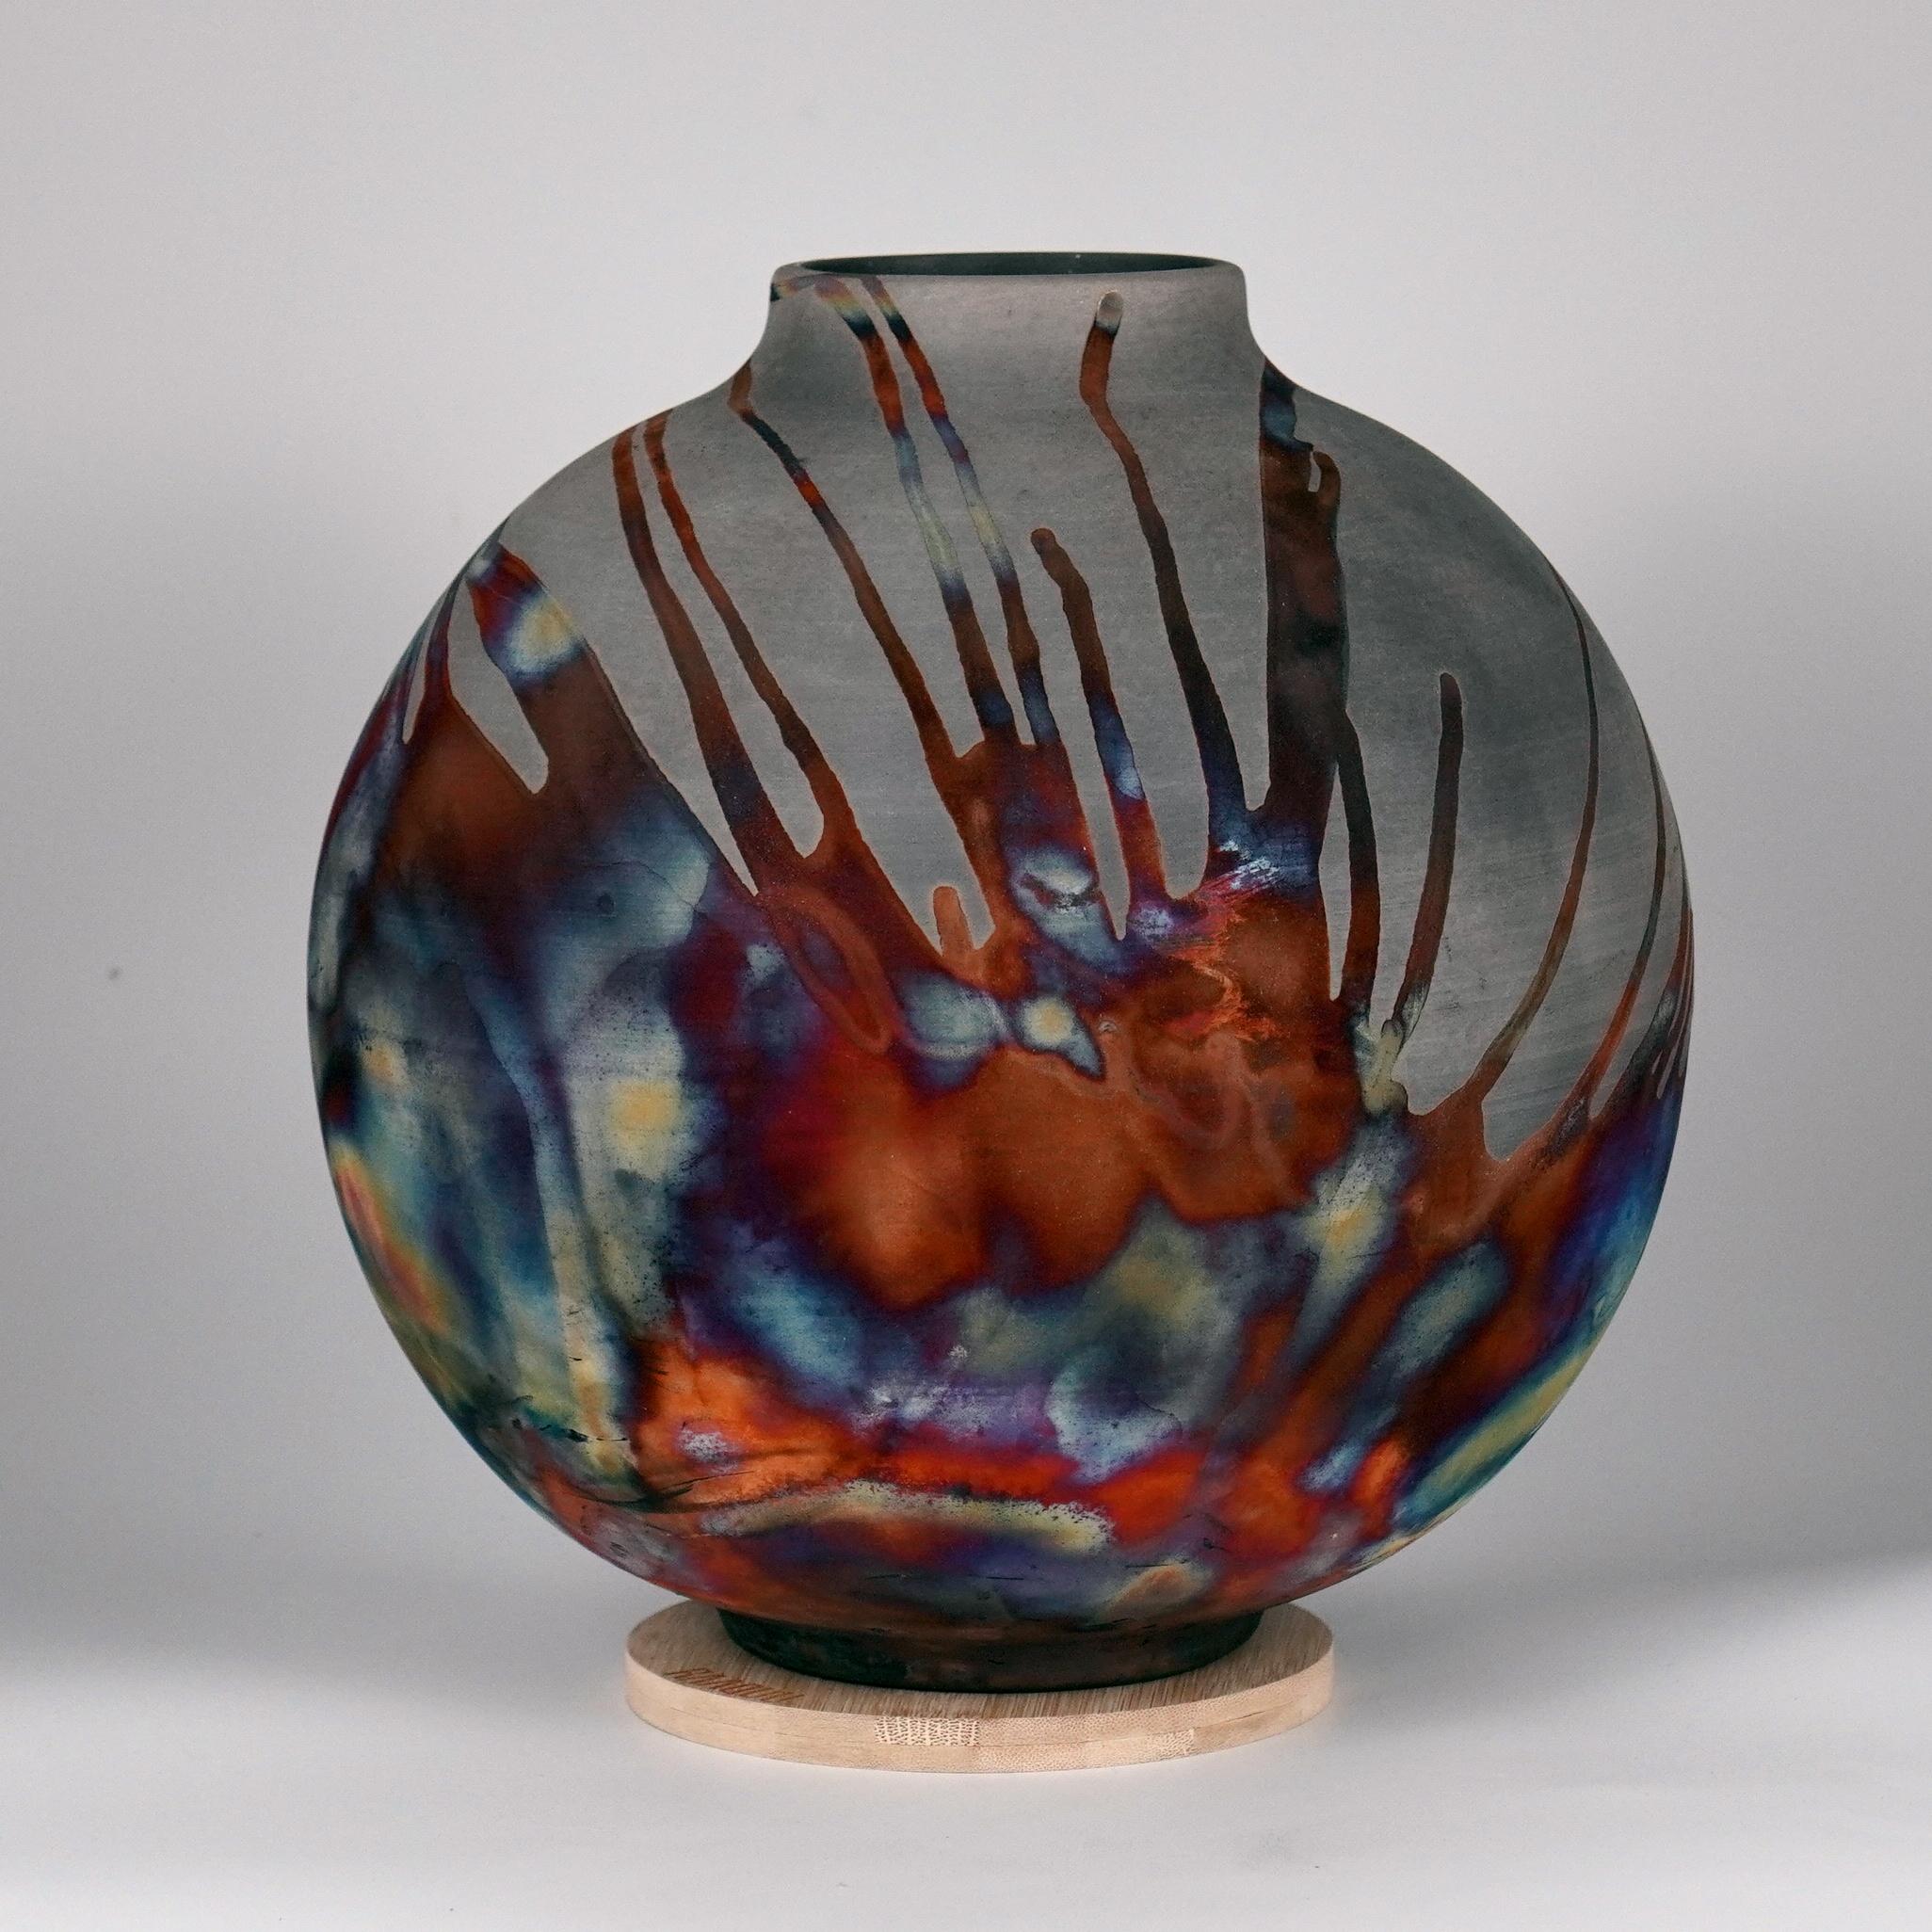 A mesmerizing sight to behold as soon as the rainbow-like patinas catch your eye. This Globe Vase is a round, capacious piece produced using the Raku technique, resulting in a beautiful unpredictable finish. This vase would be the perfect